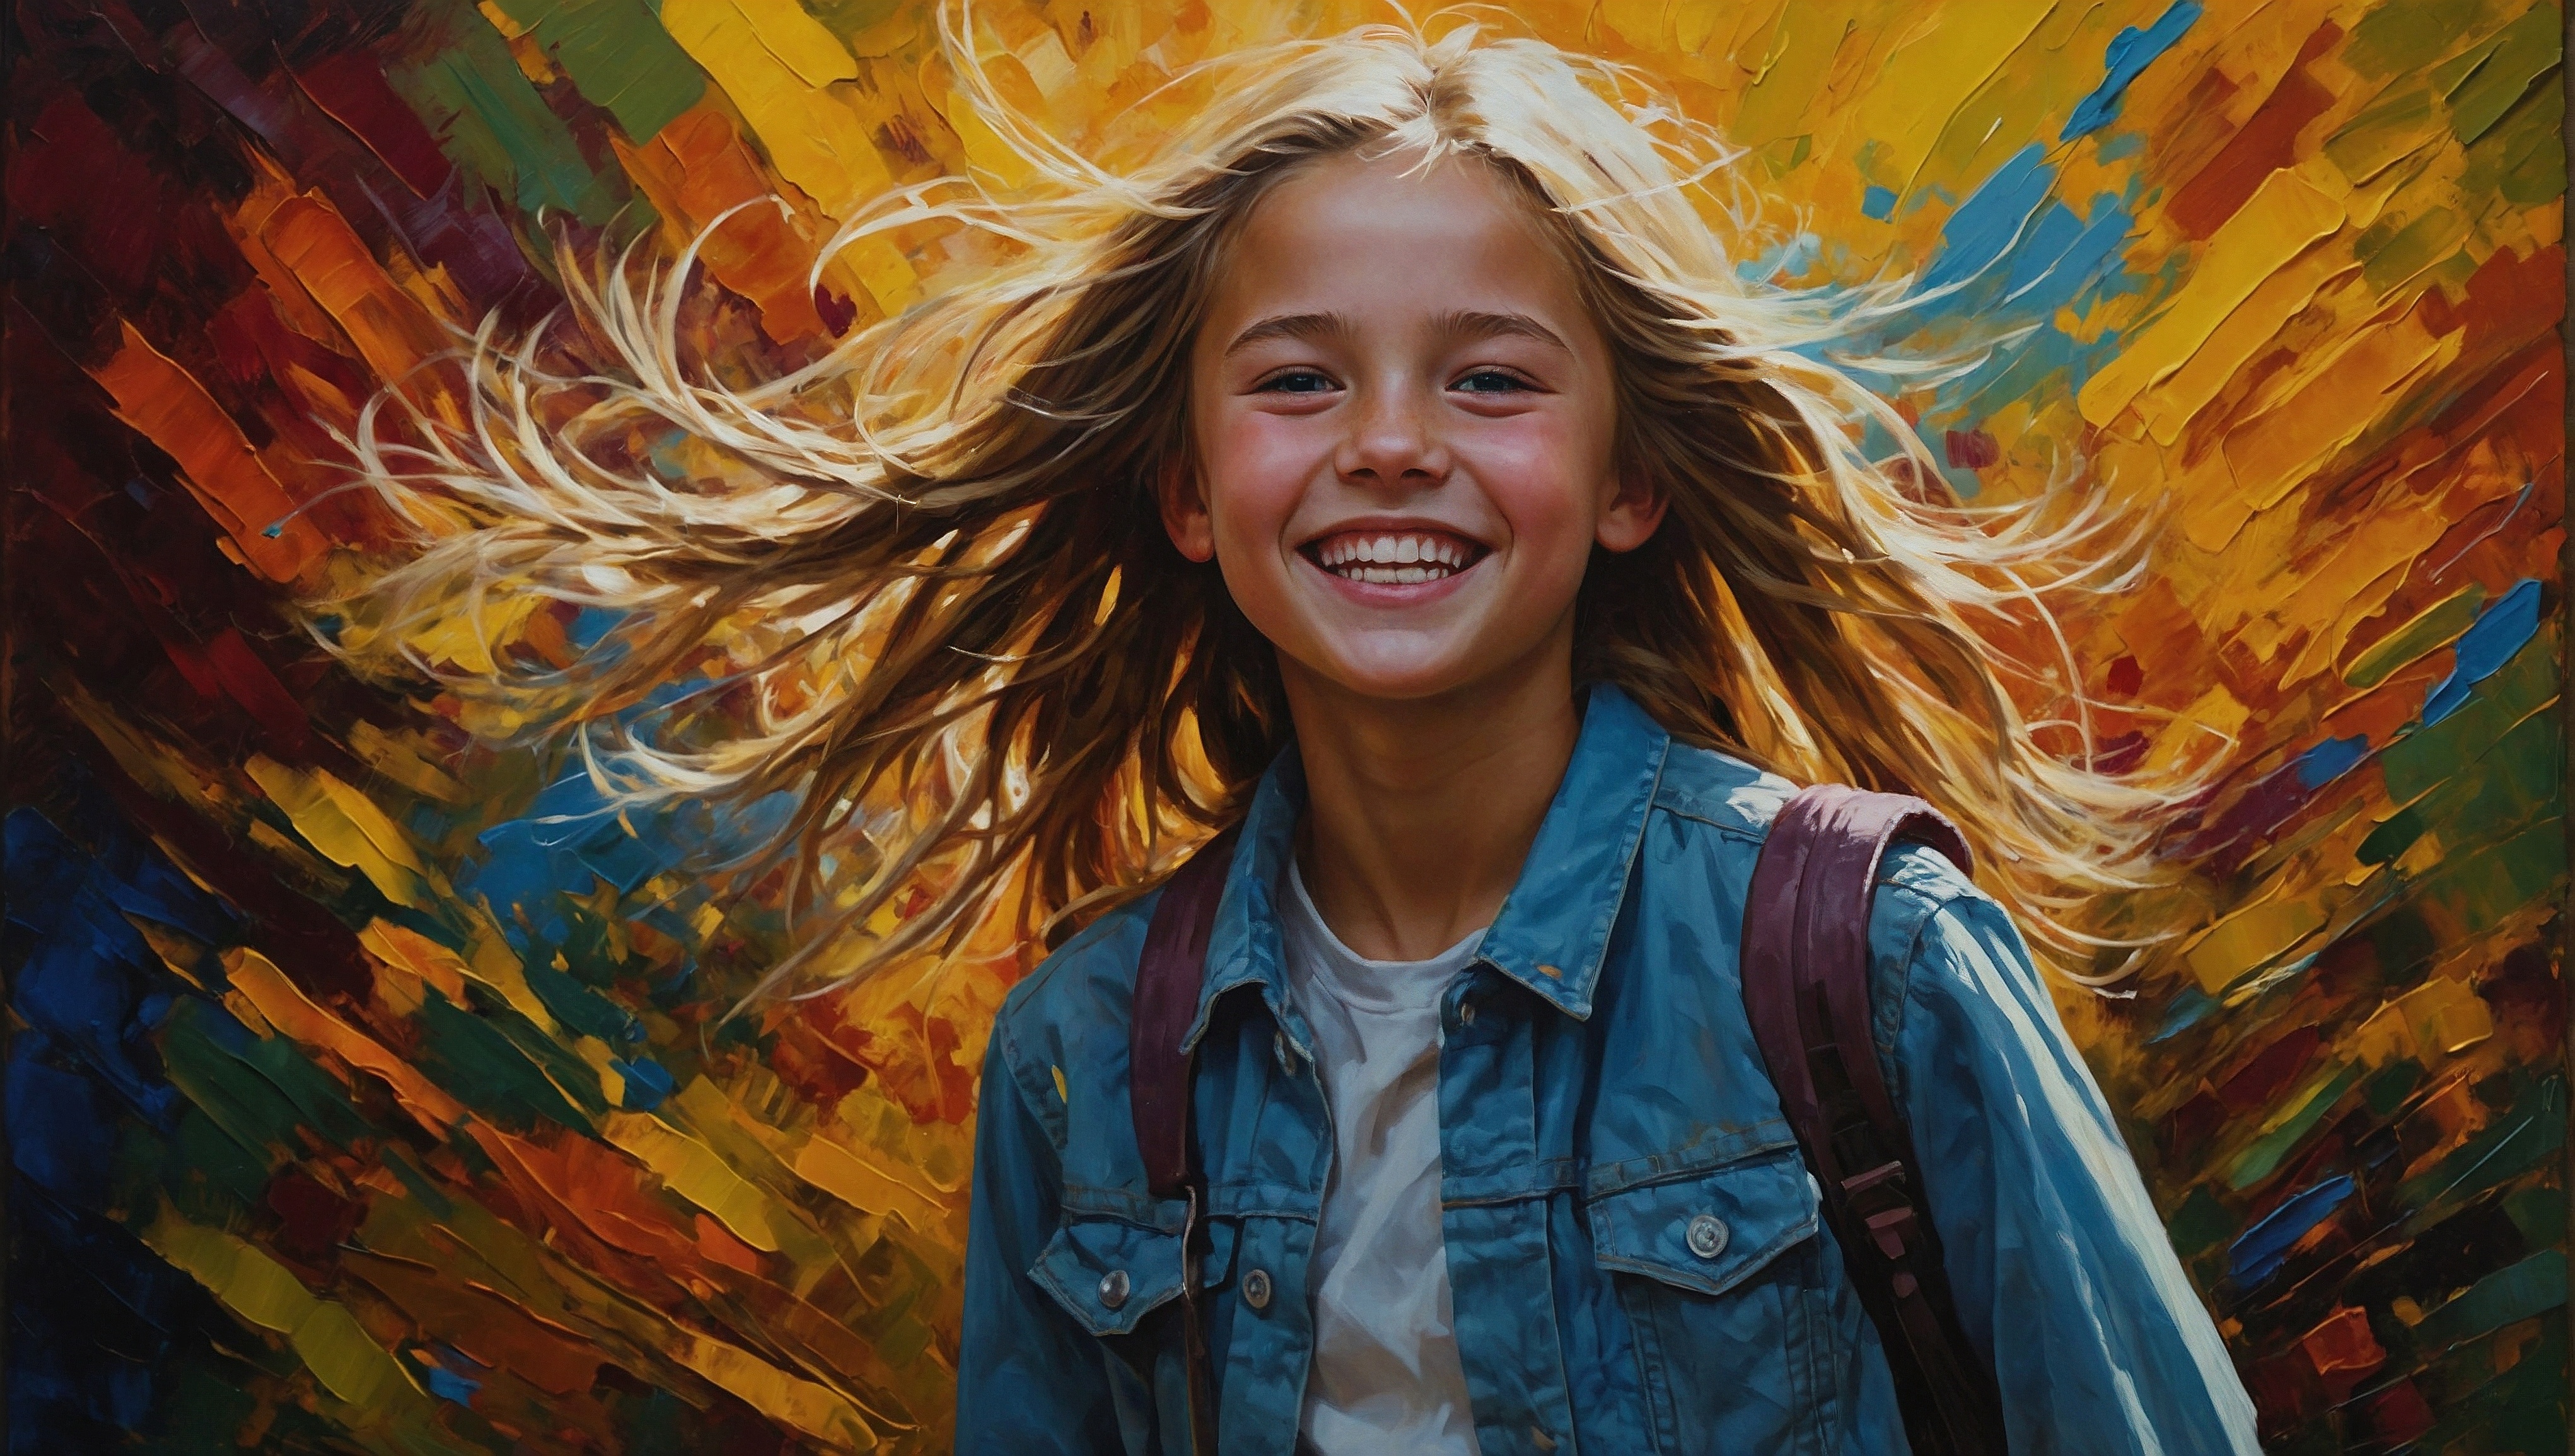 A girl smiles in the background of a painting with colorful wings